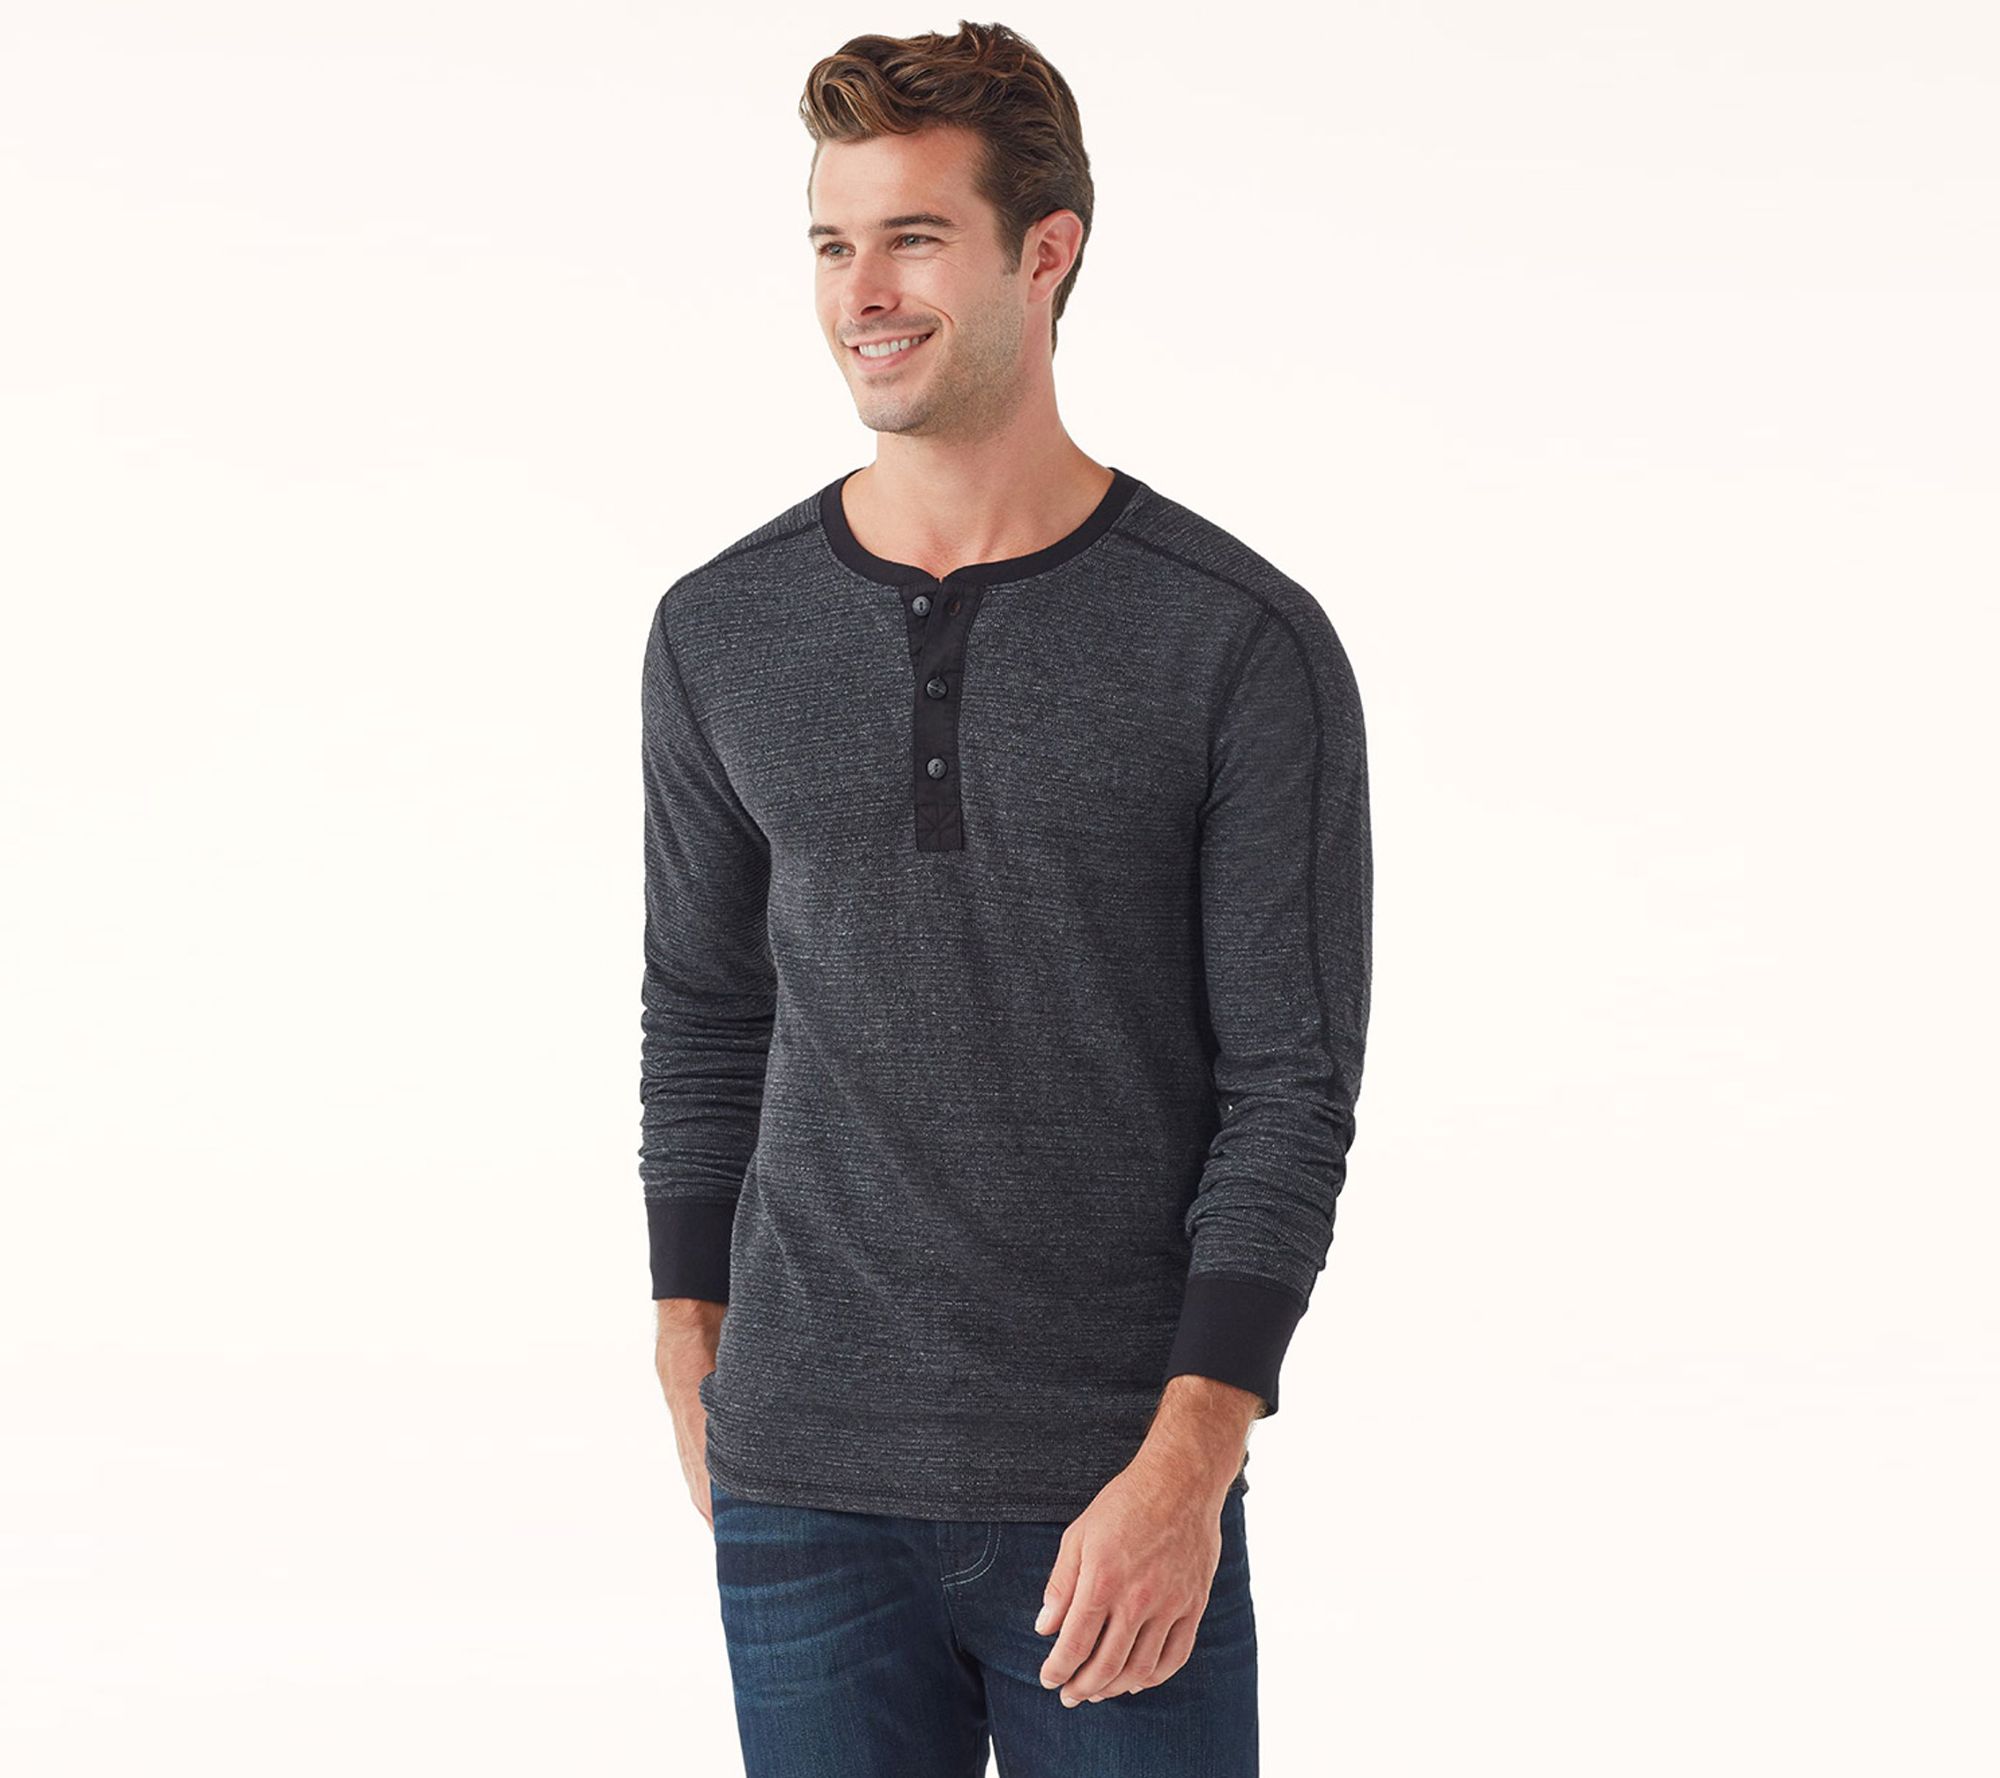 Mills Supply by Splendid Men's Double Face Thermal - QVC.com